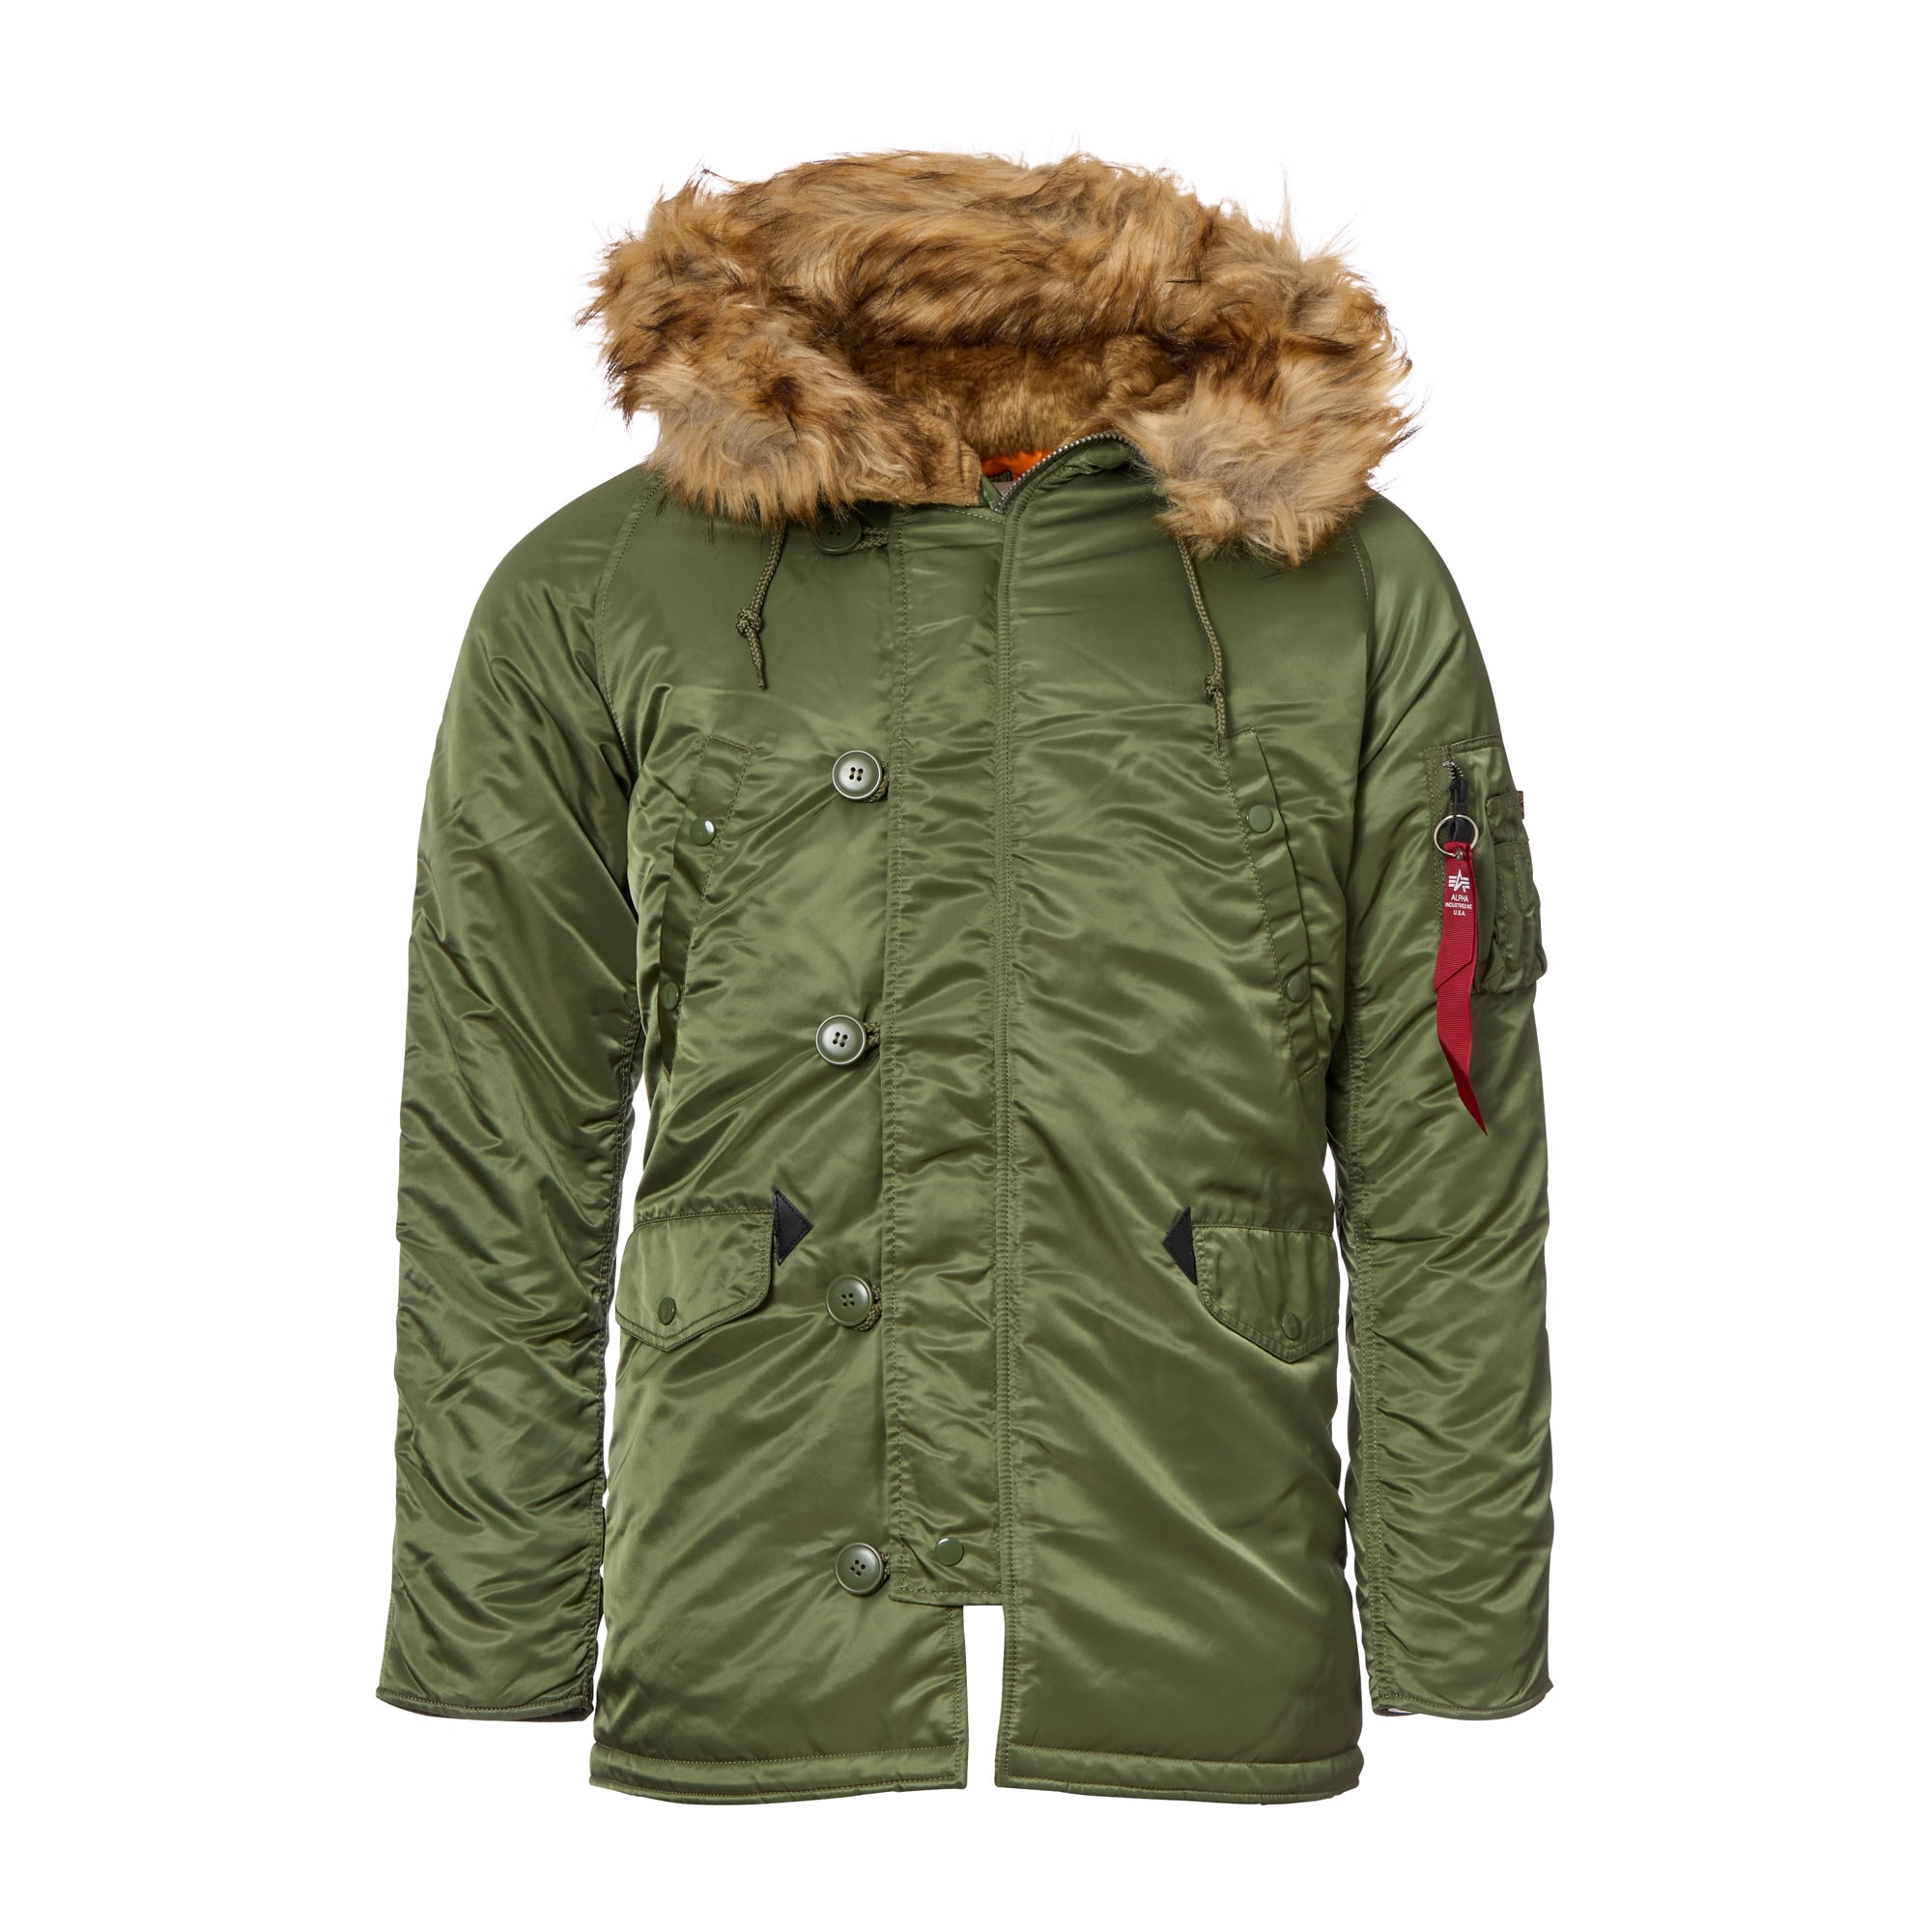 Purchase the Alpha Industries Winter Jacket N-3B VF 59 sage gree